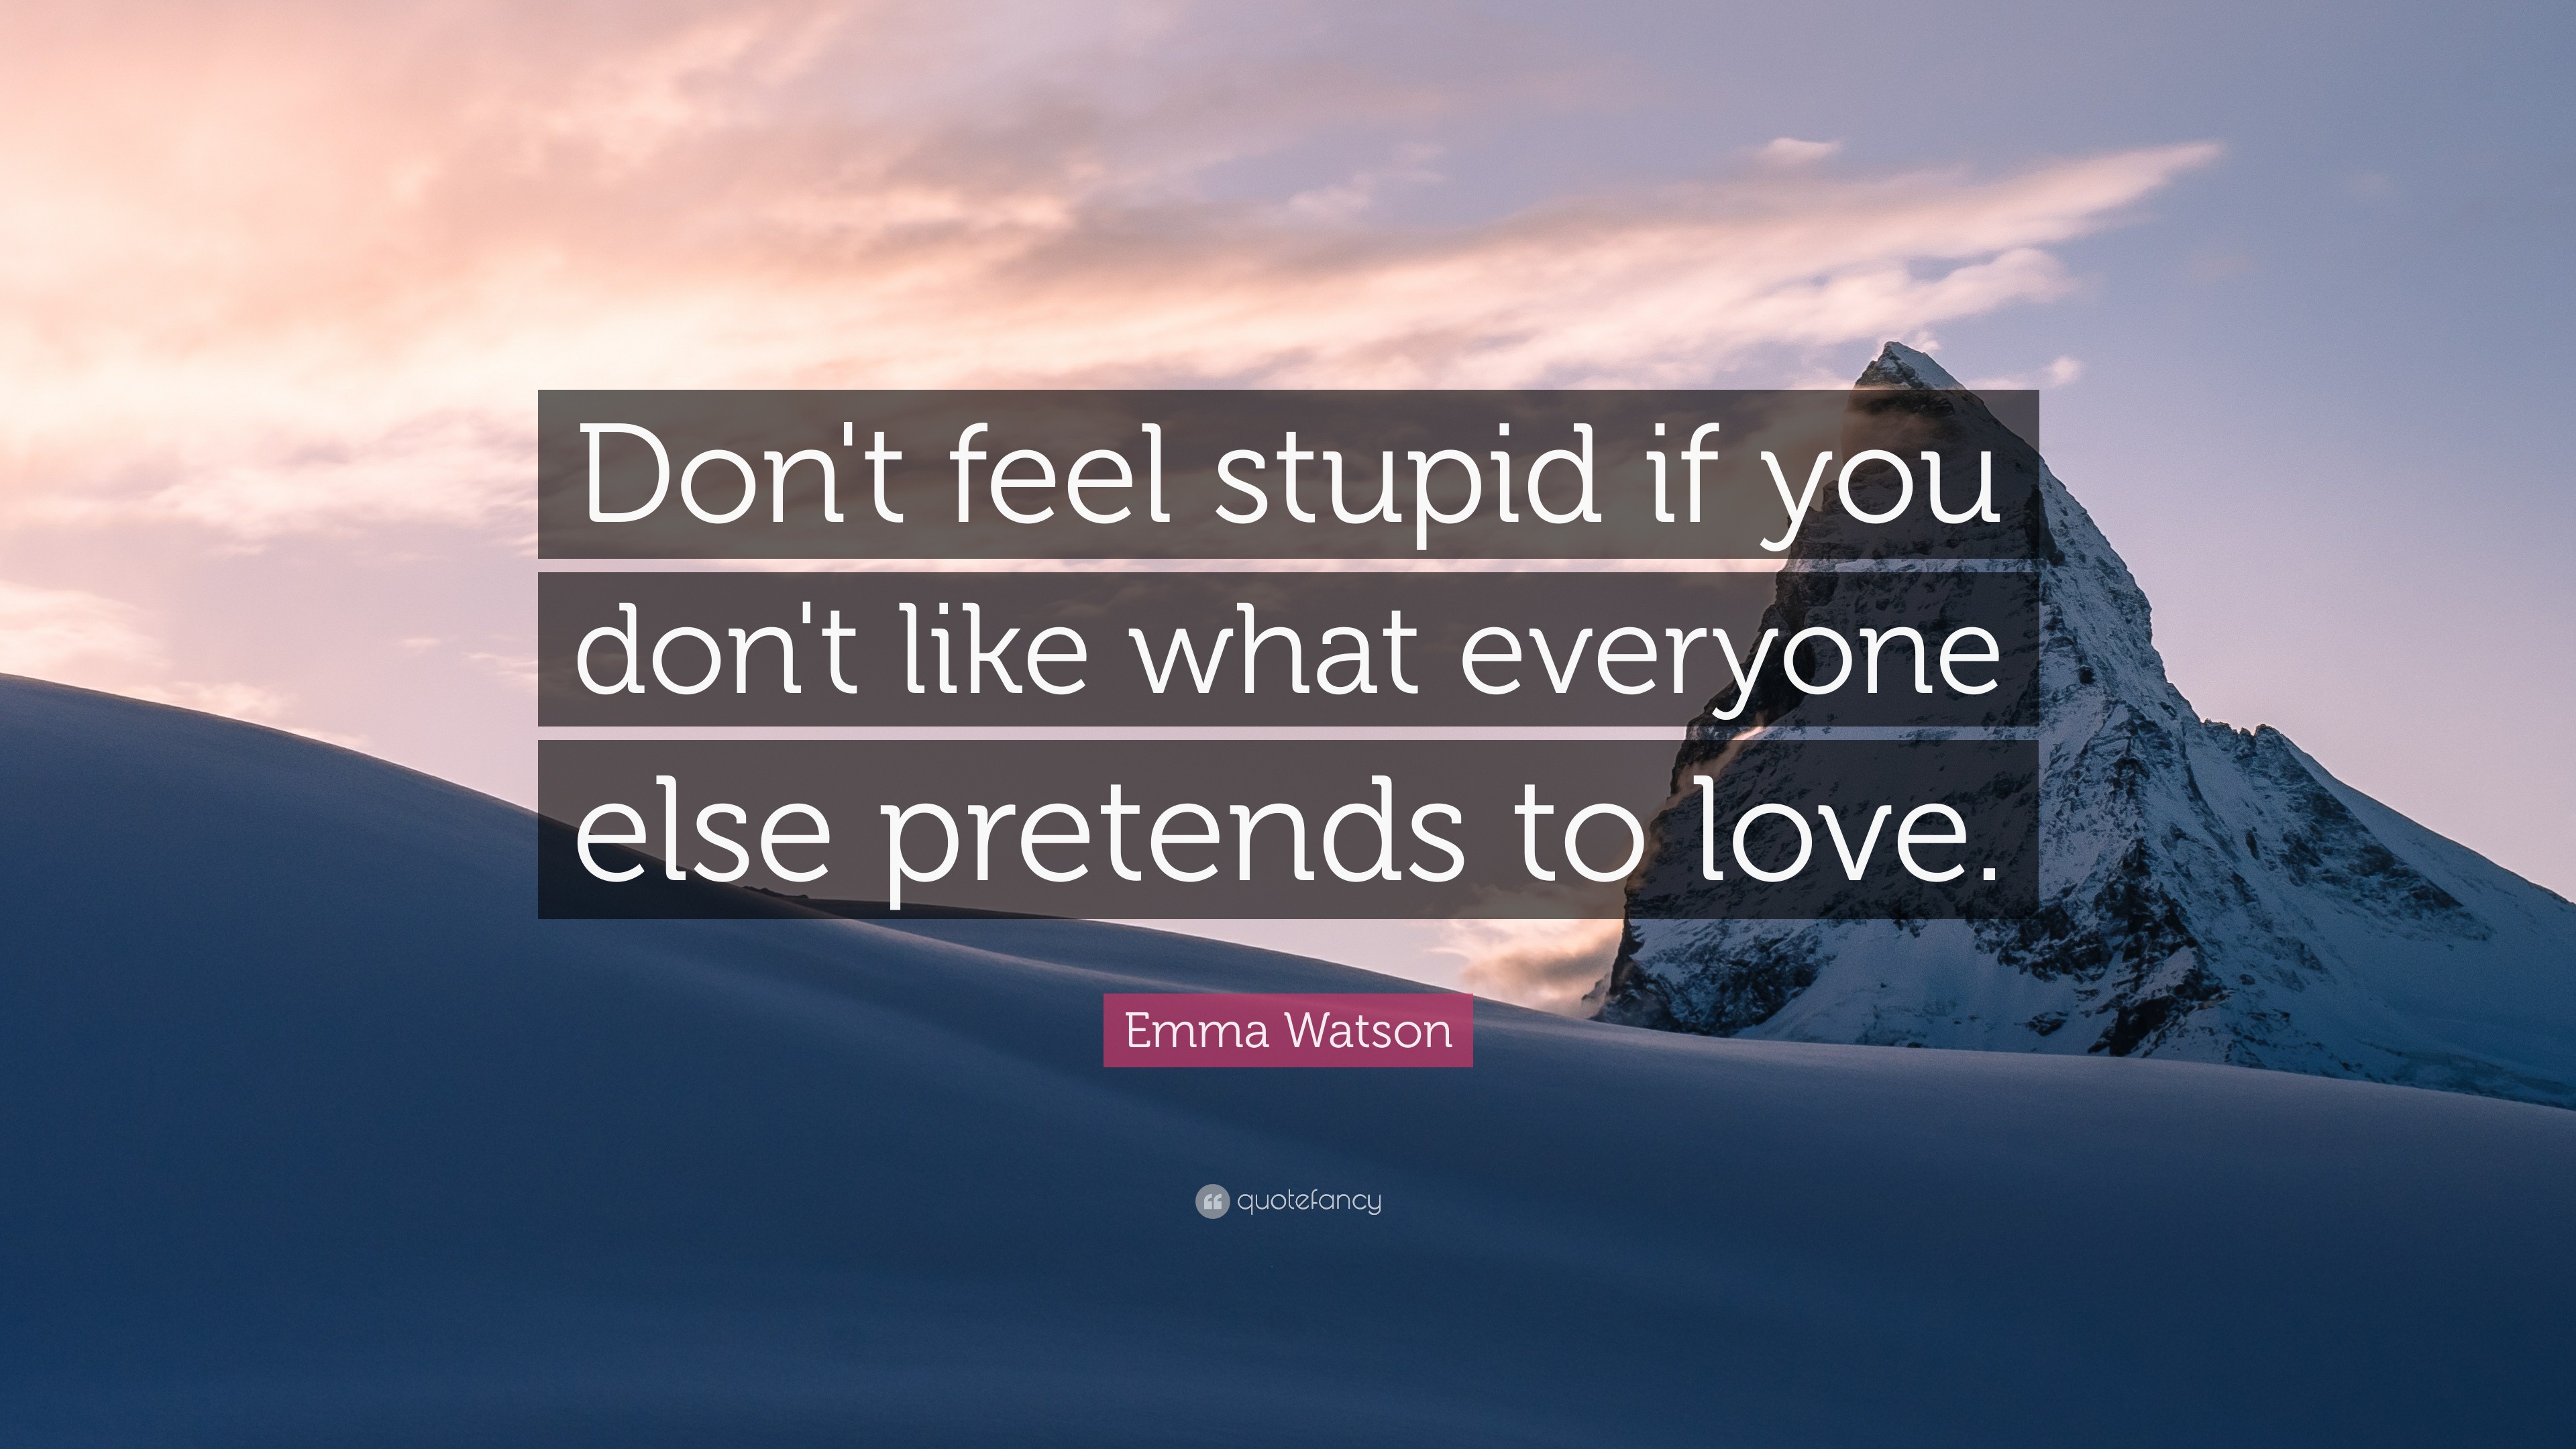 Emma Watson Quote “Don't feel stupid if you don't like what everyone